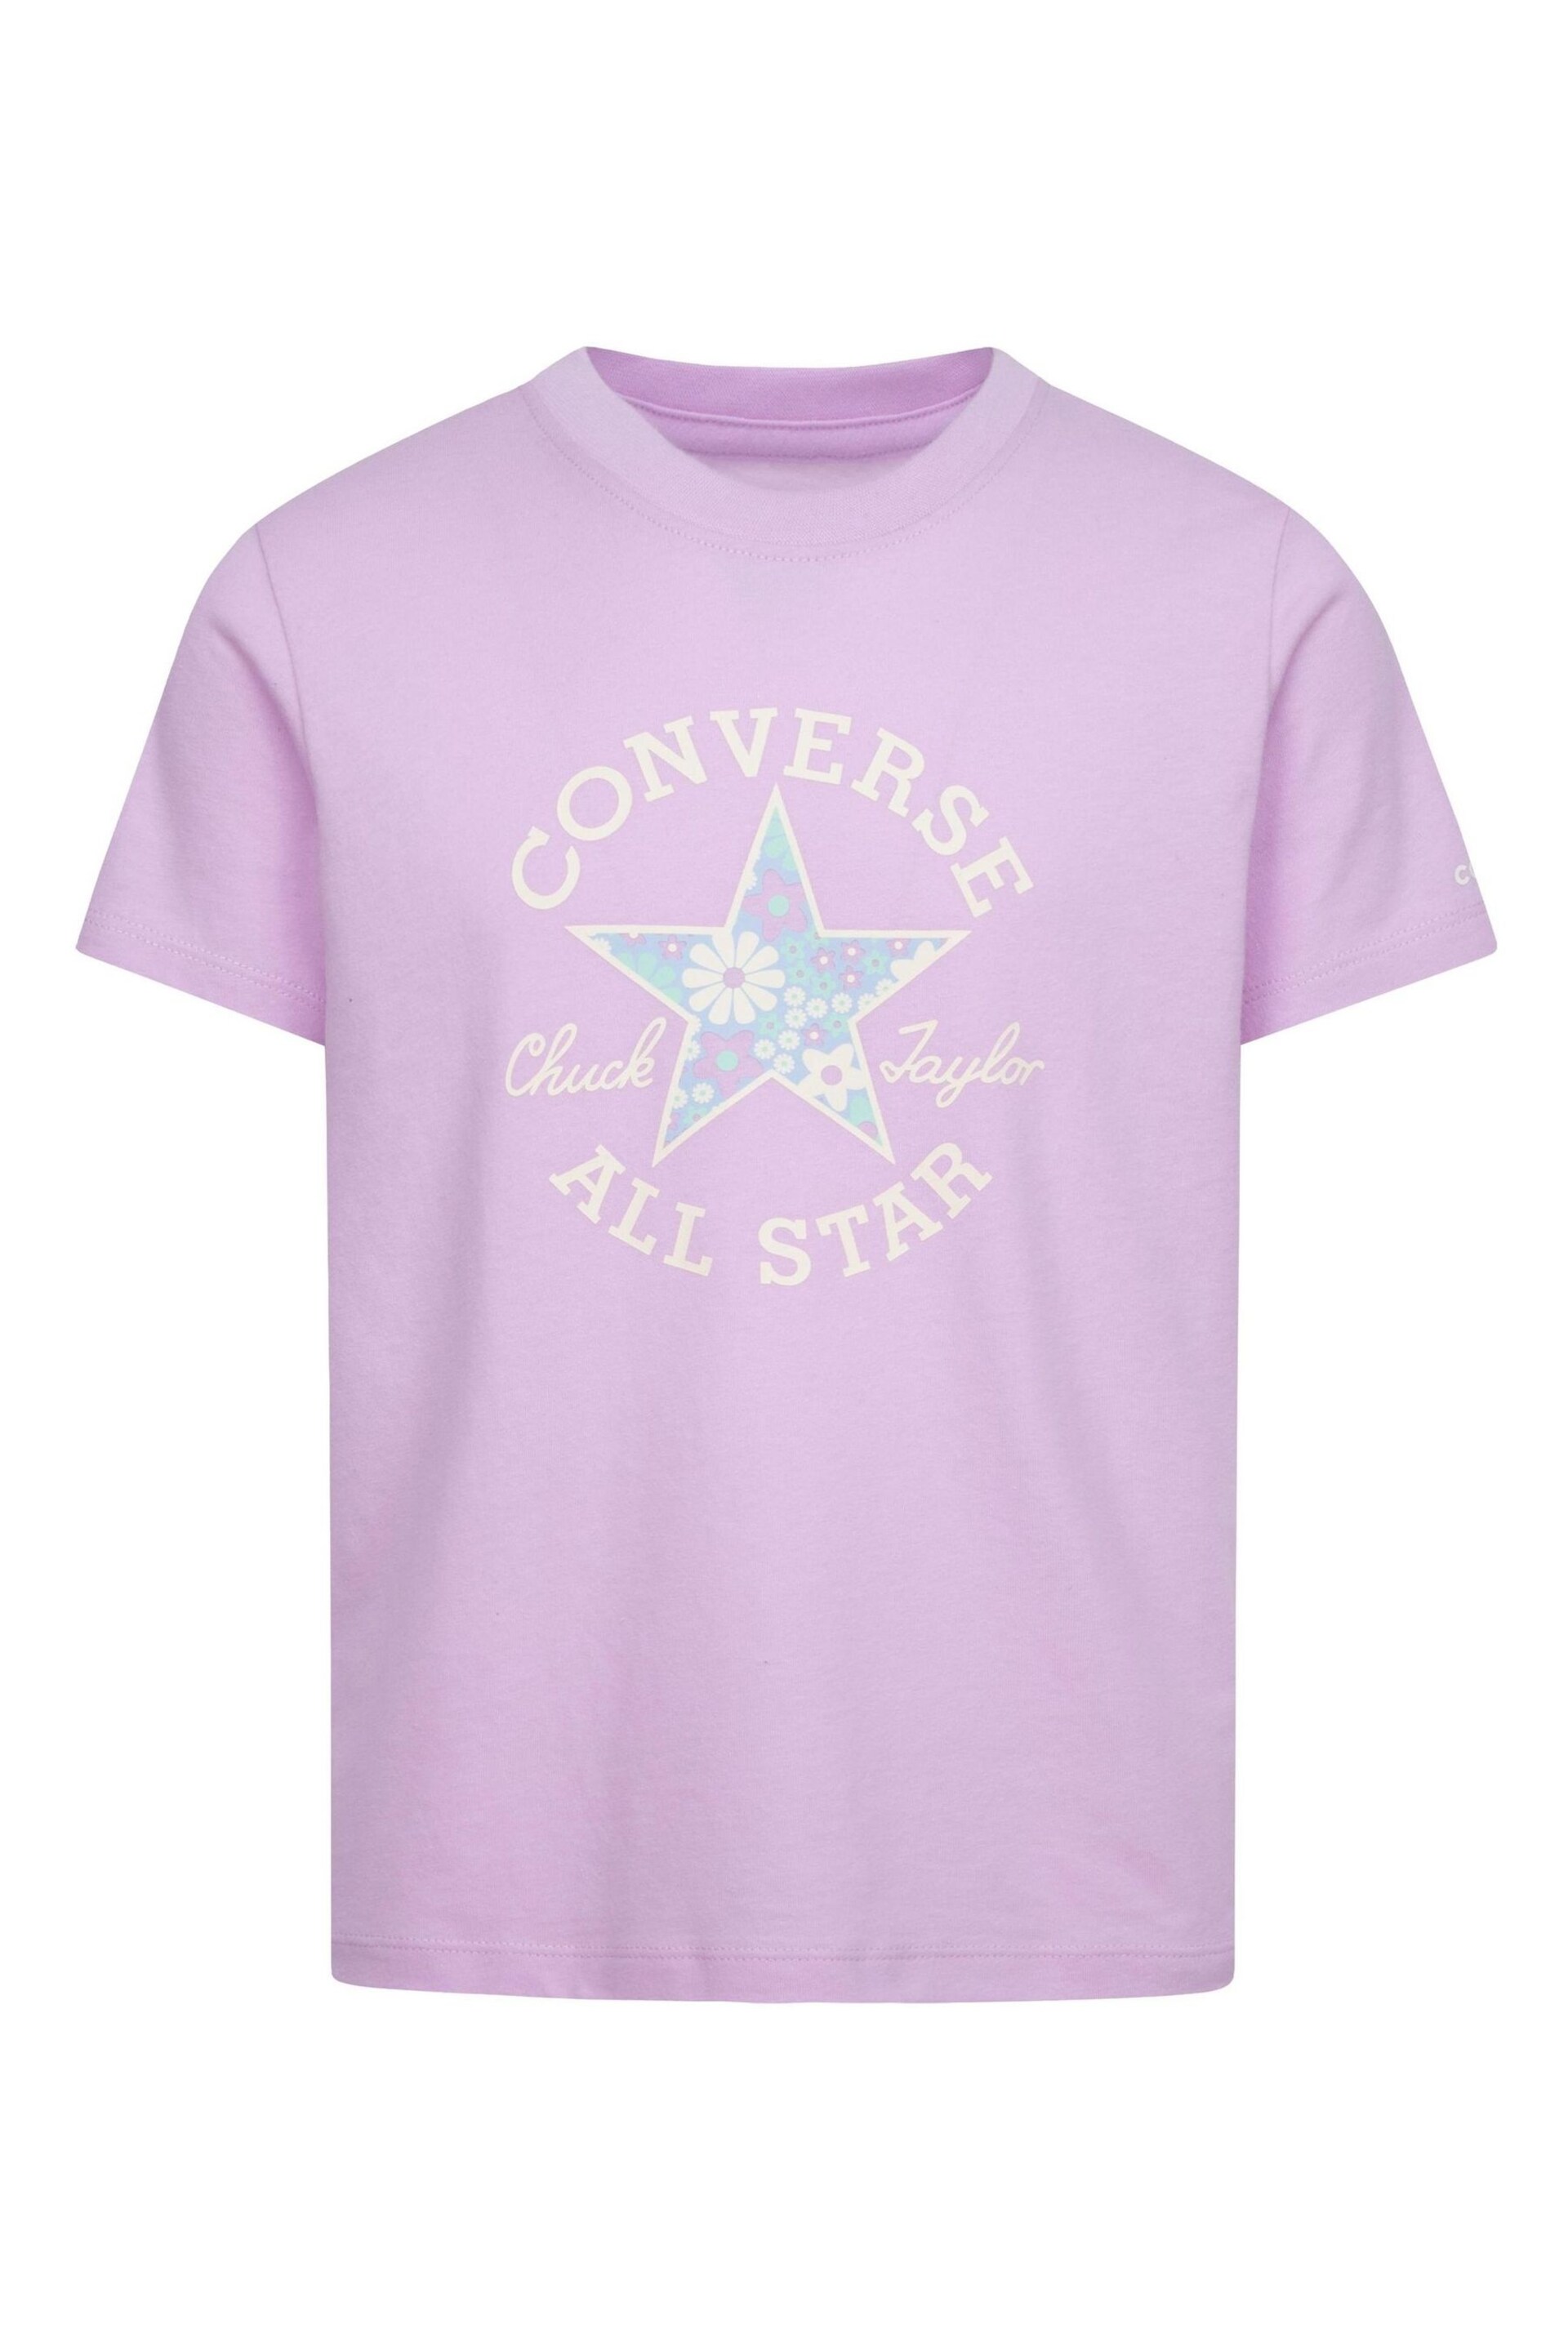 Converse Purple Floral Graphic T-Shirt - Image 1 of 2